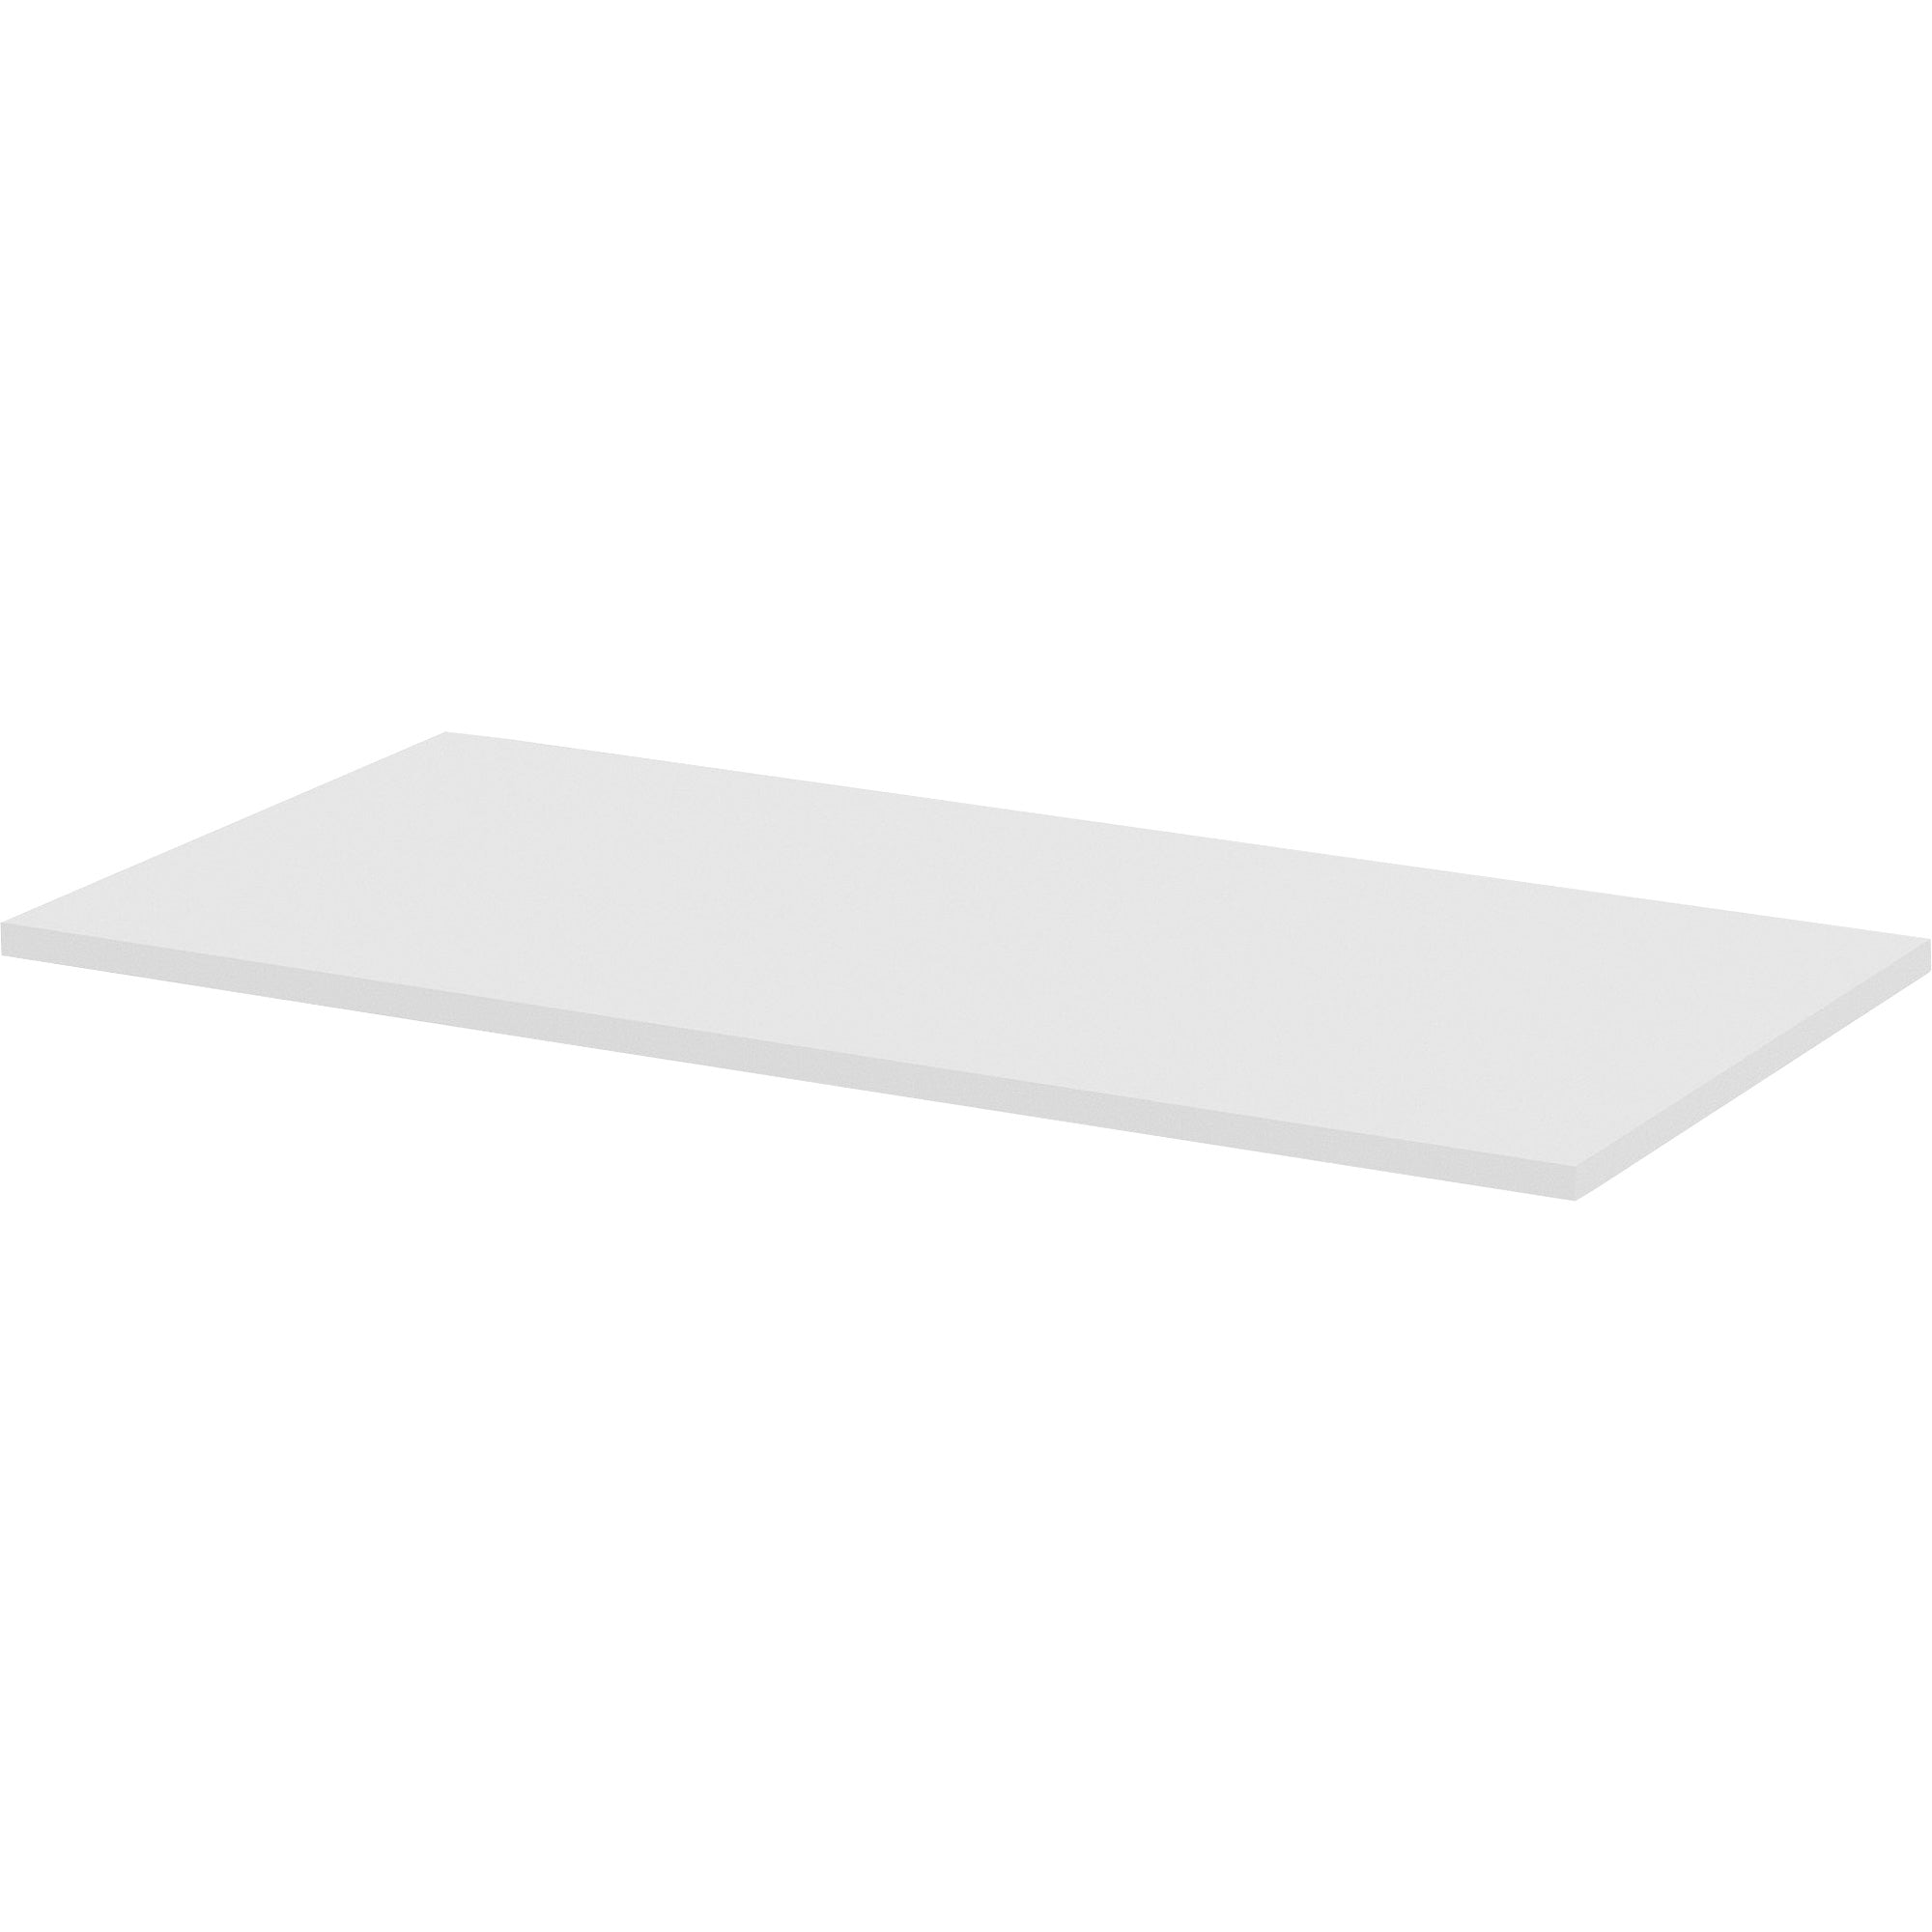 lorell-training-tabletop-for-table-topwhite-rectangle-top-48-table-top-length-x-24-table-top-width-x-1-table-top-thickness-assembly-required-1-each_llr62593 - 1